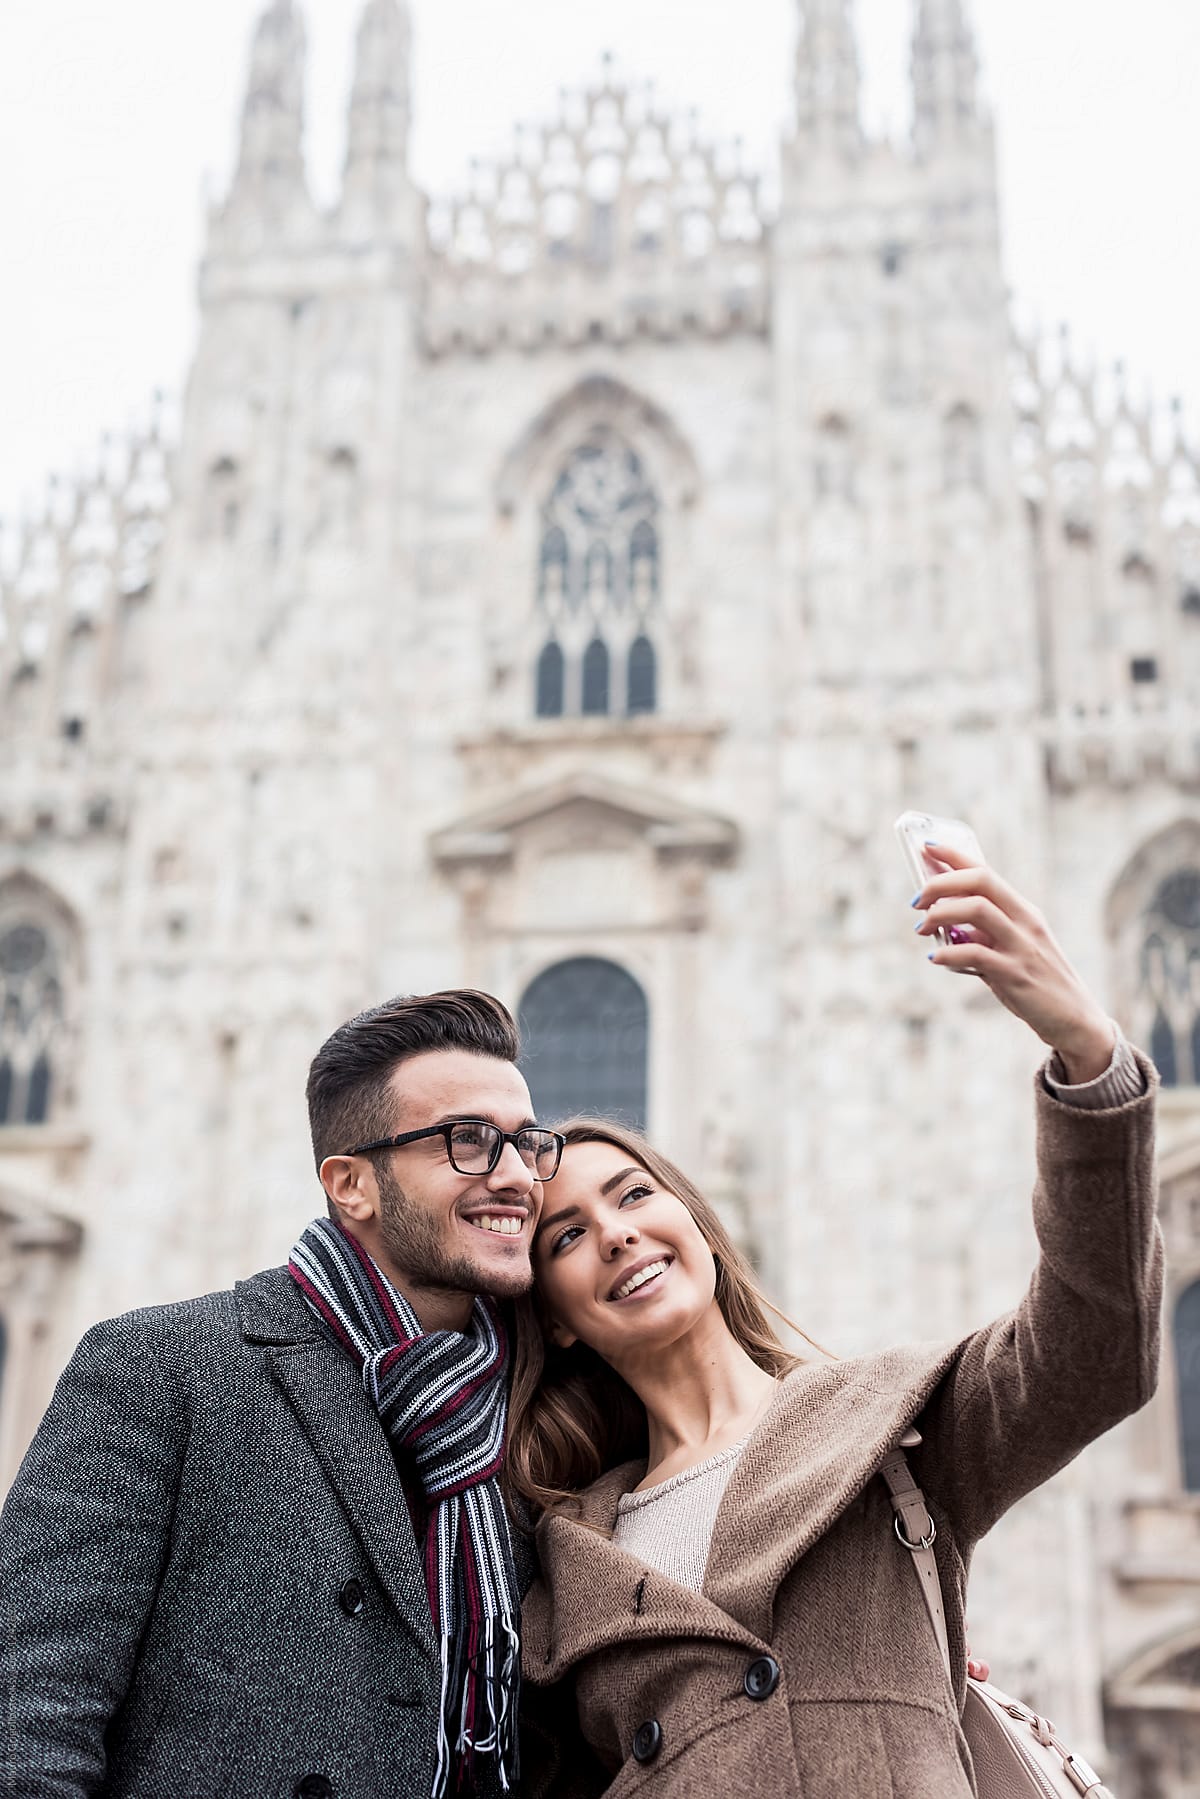 Smiling couple taking a selfie in Milan, Italy.